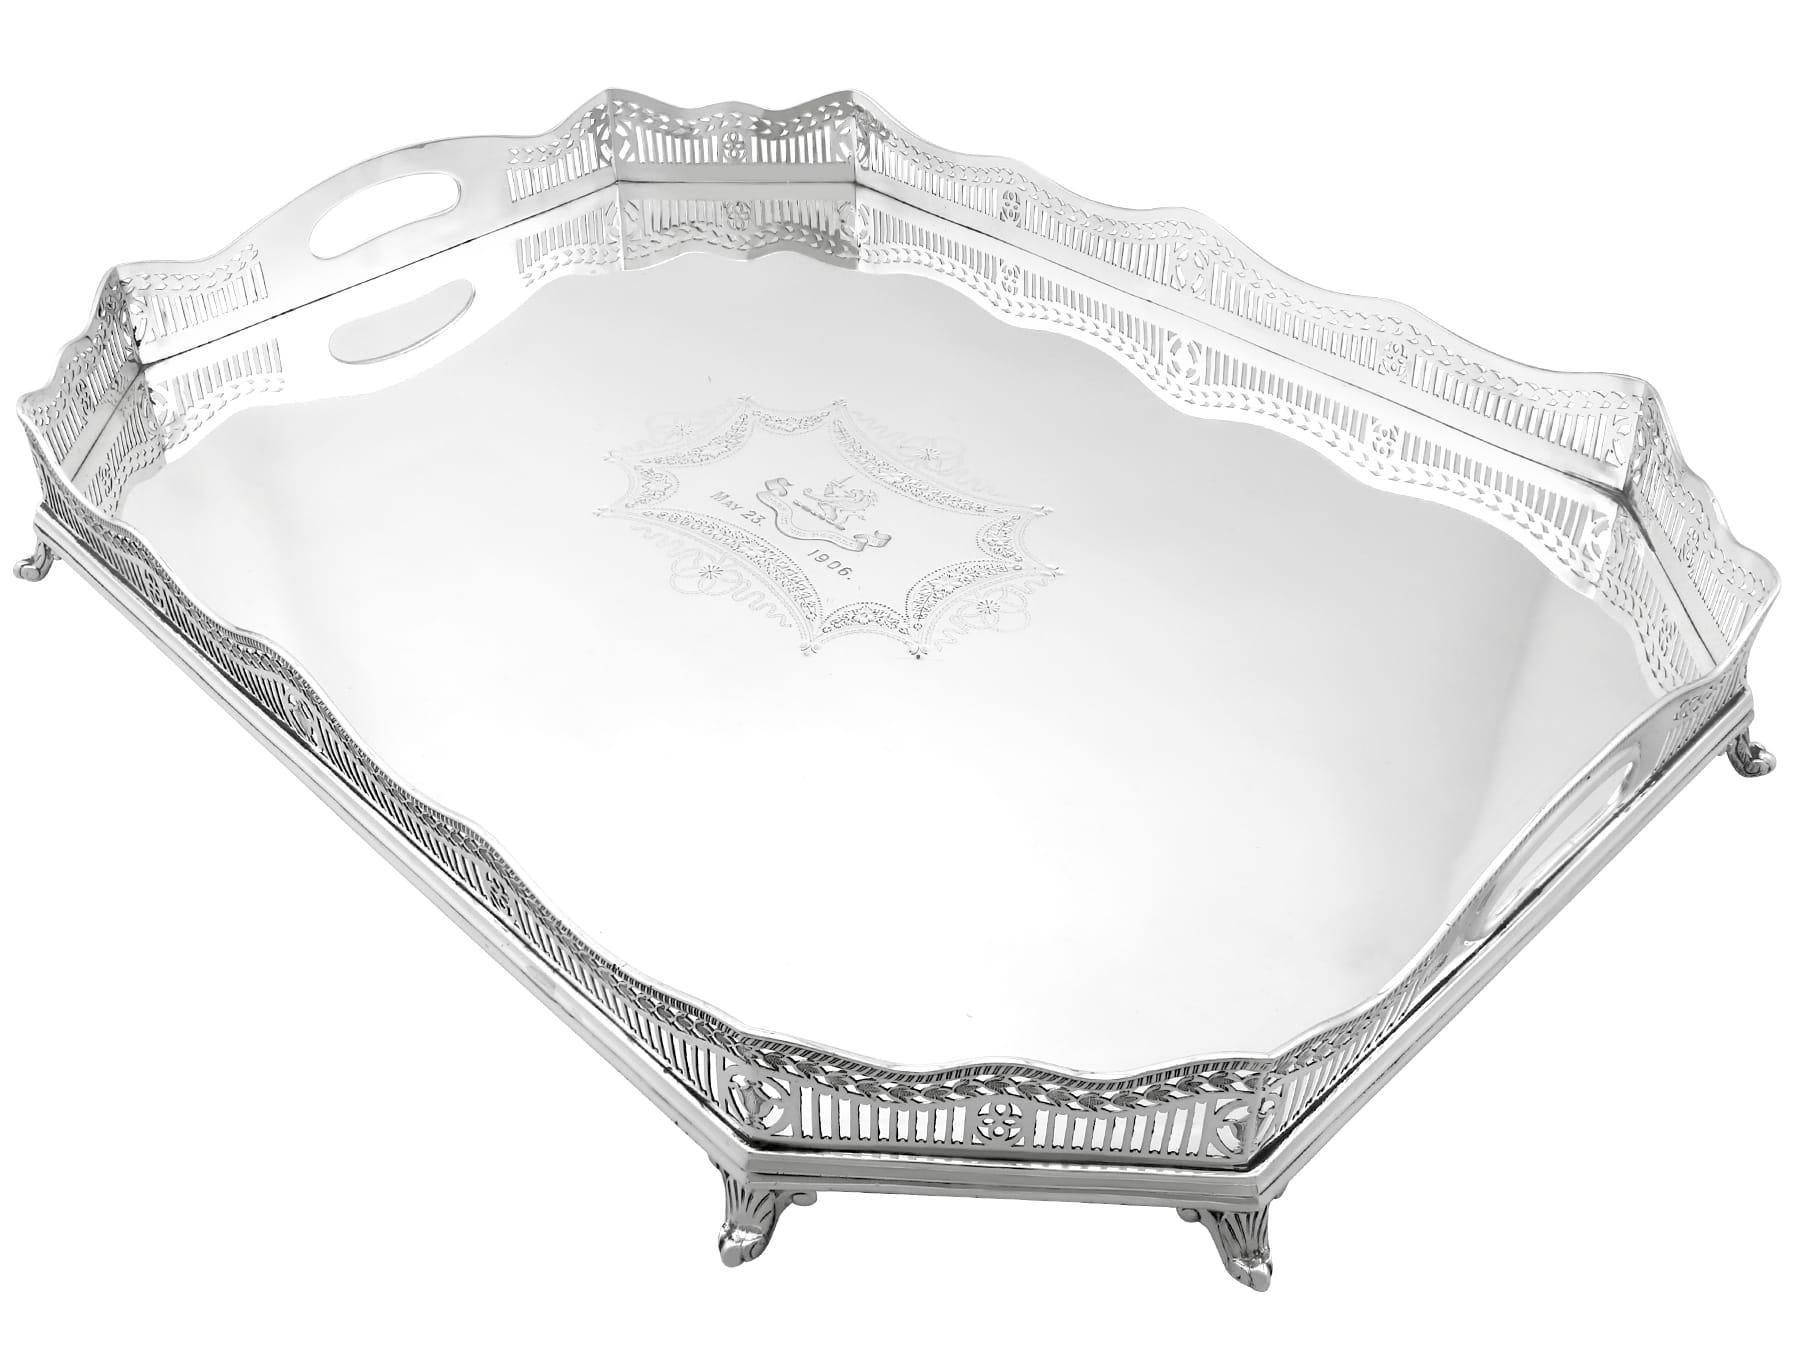 This magnificent antique Edwardian sterling silver tray has a rectangular cut-cornered shaped form.
The surface of this sterling silver serving tray is embellished with an impressive contemporary bright cut engraved cartouche, reflecting the shape